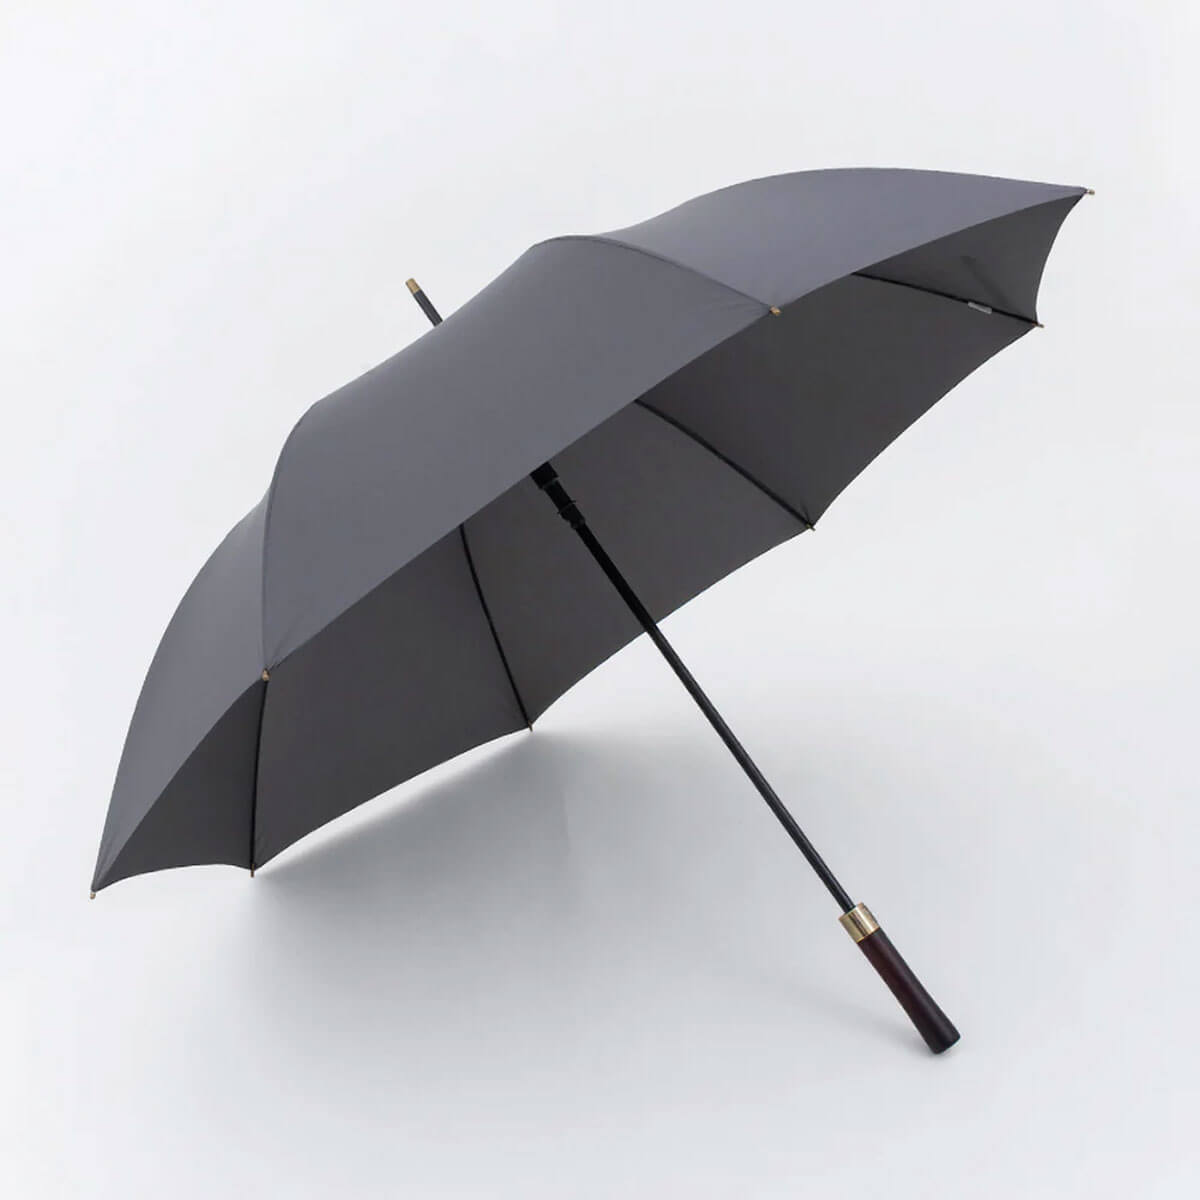 Vintage-style wooden handle umbrella with large canopy.